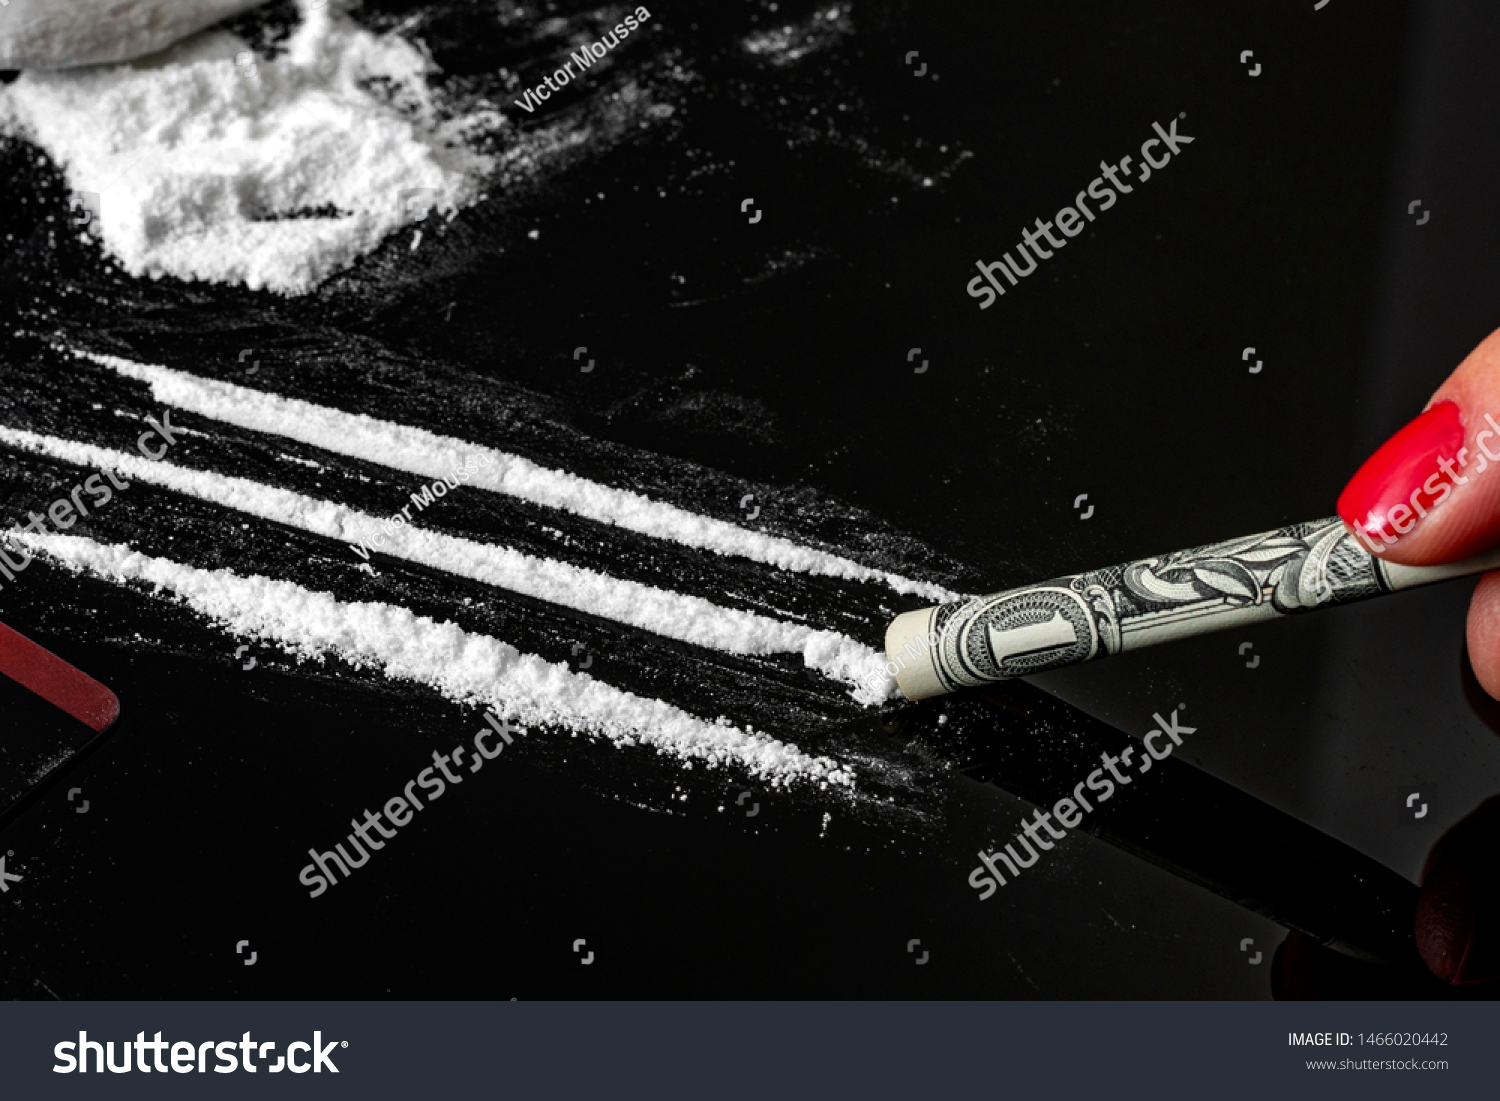 Drug addiction and substance abuse concept theme with close up on a troubled addict using a one dollar bill as a straw to snort a line of cocaine on a dark mirror table next to a pile of white powder #1466020442